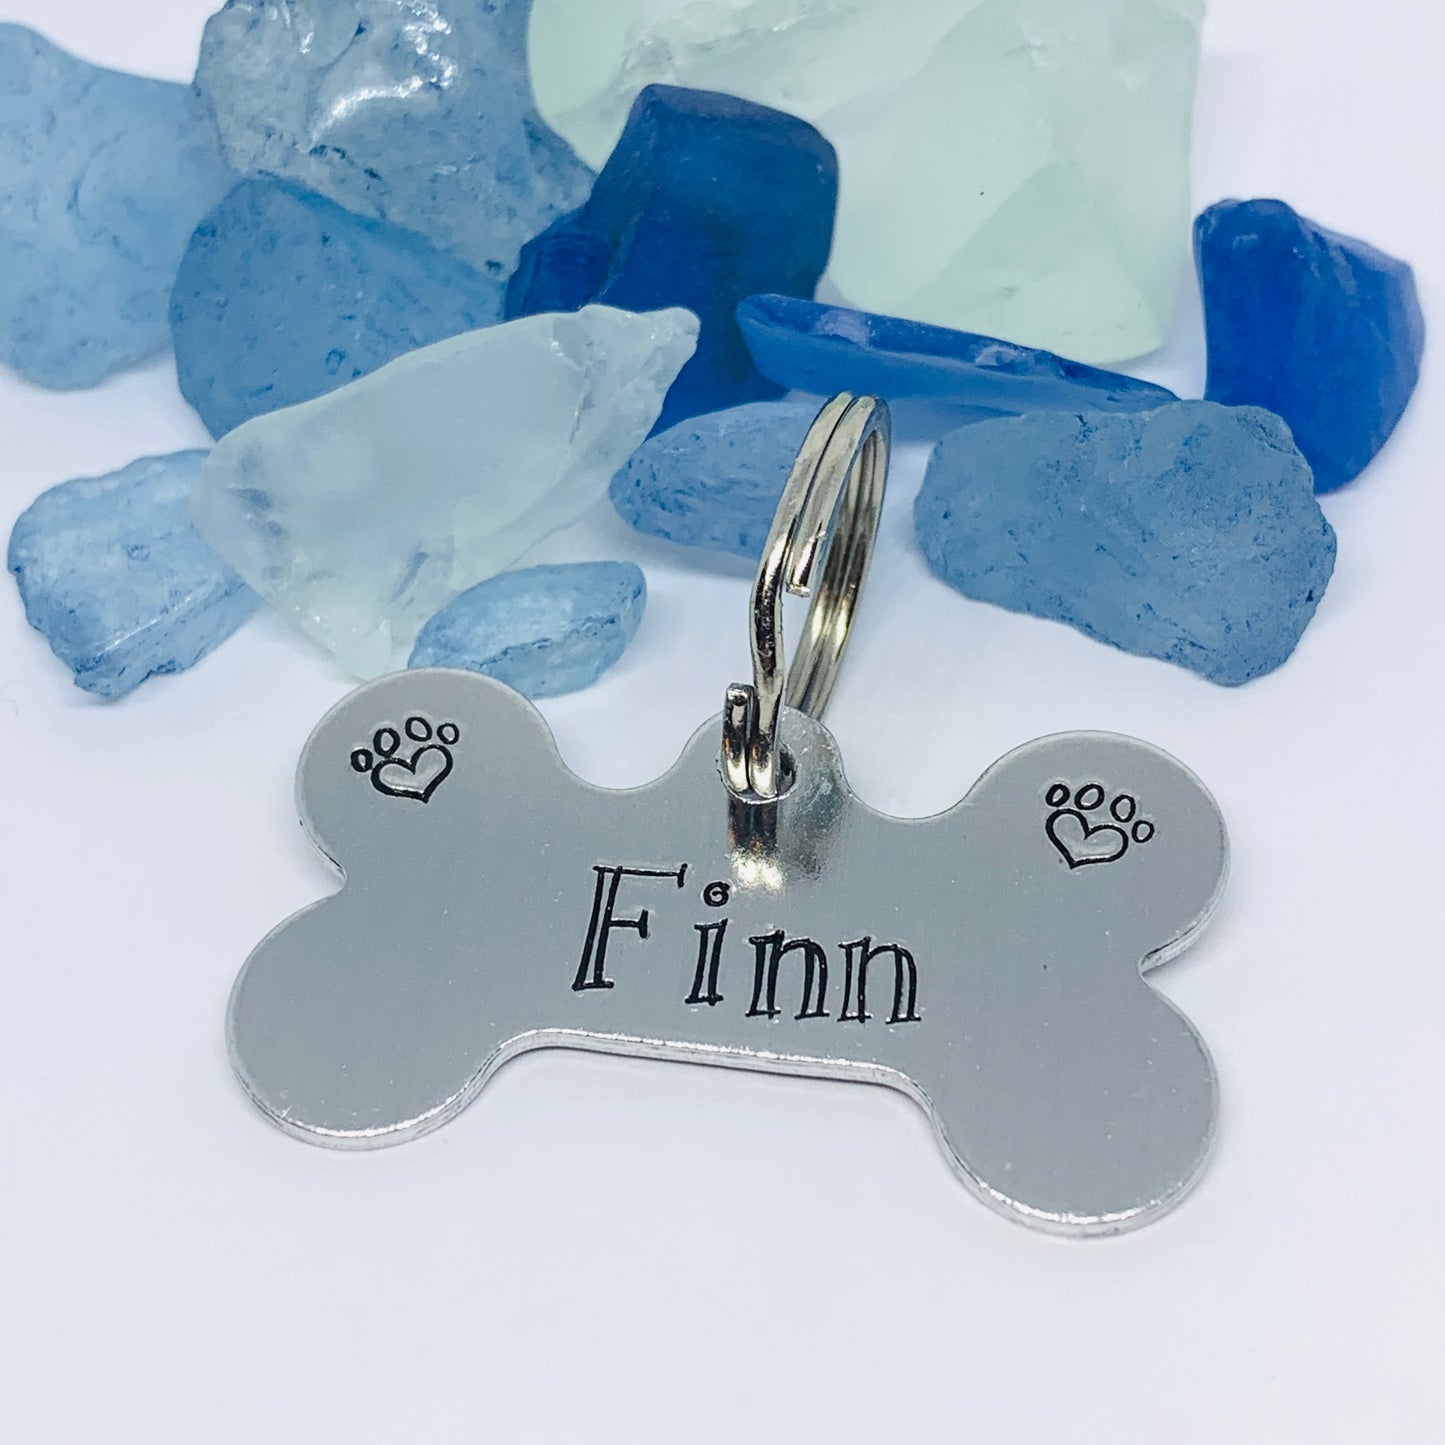 Personalized Pet Tag | Custom Dog Tag | Cat Tag | Cat Collar Tag | Cat ID Tag | Dog ID Tag | Dog Name Tag | Bone-Shaped - Hand Stamped Pet ID Tag